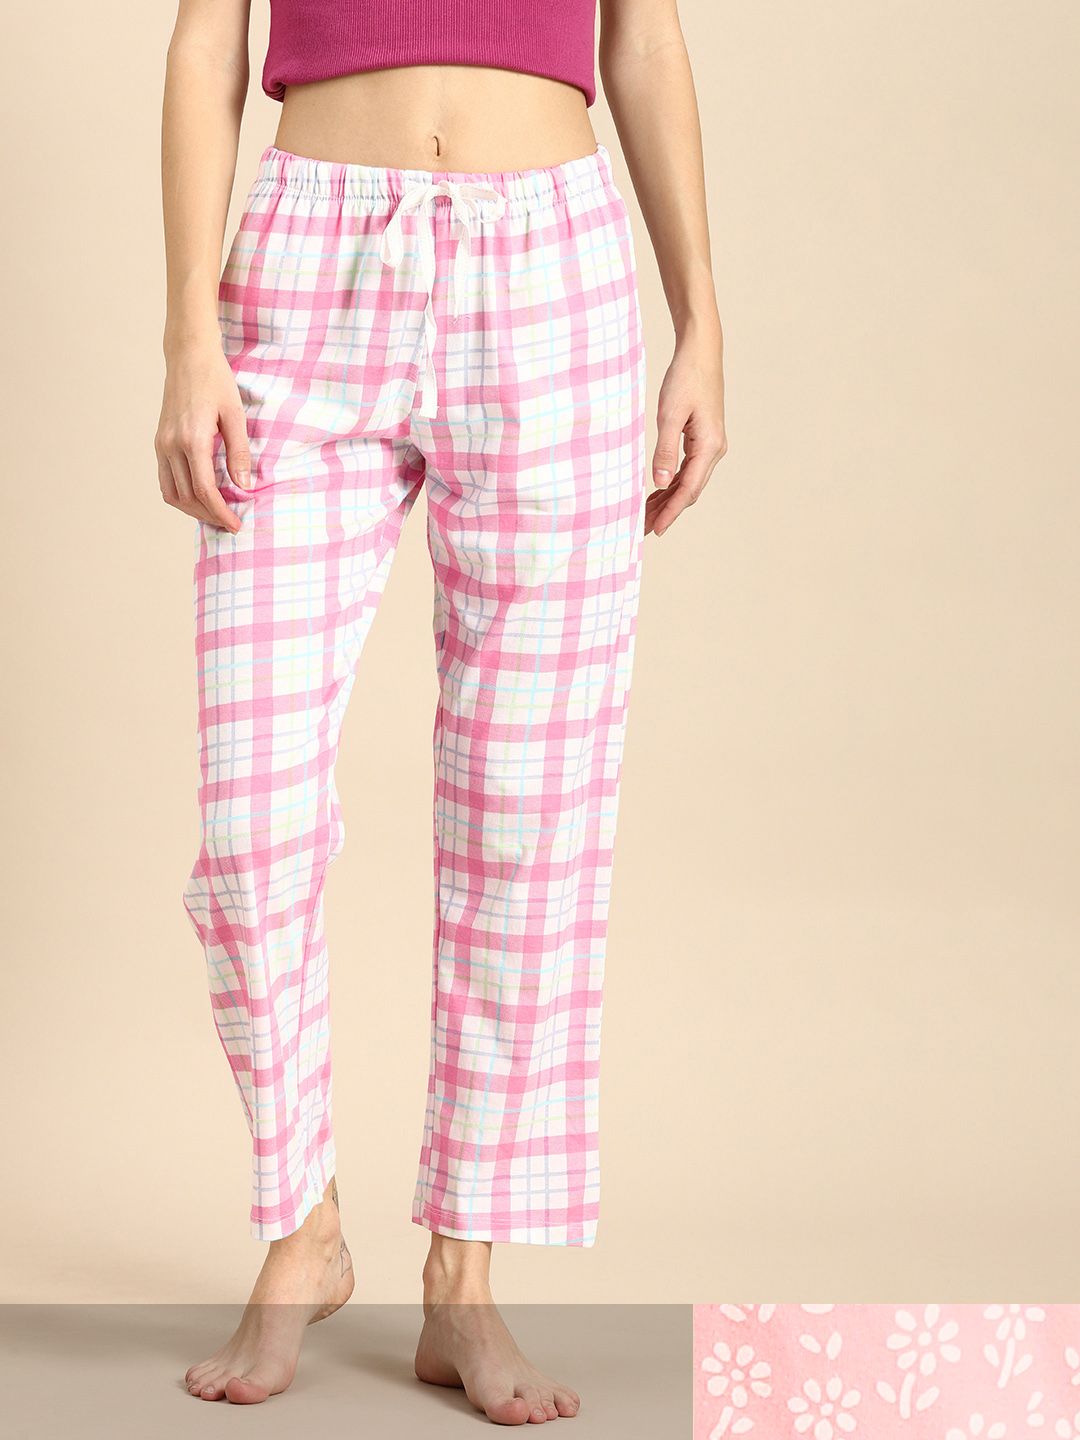 Dreamz by Pantaloons Women Pack of 2 Pink Printed Cotton Lounge Pants Price in India